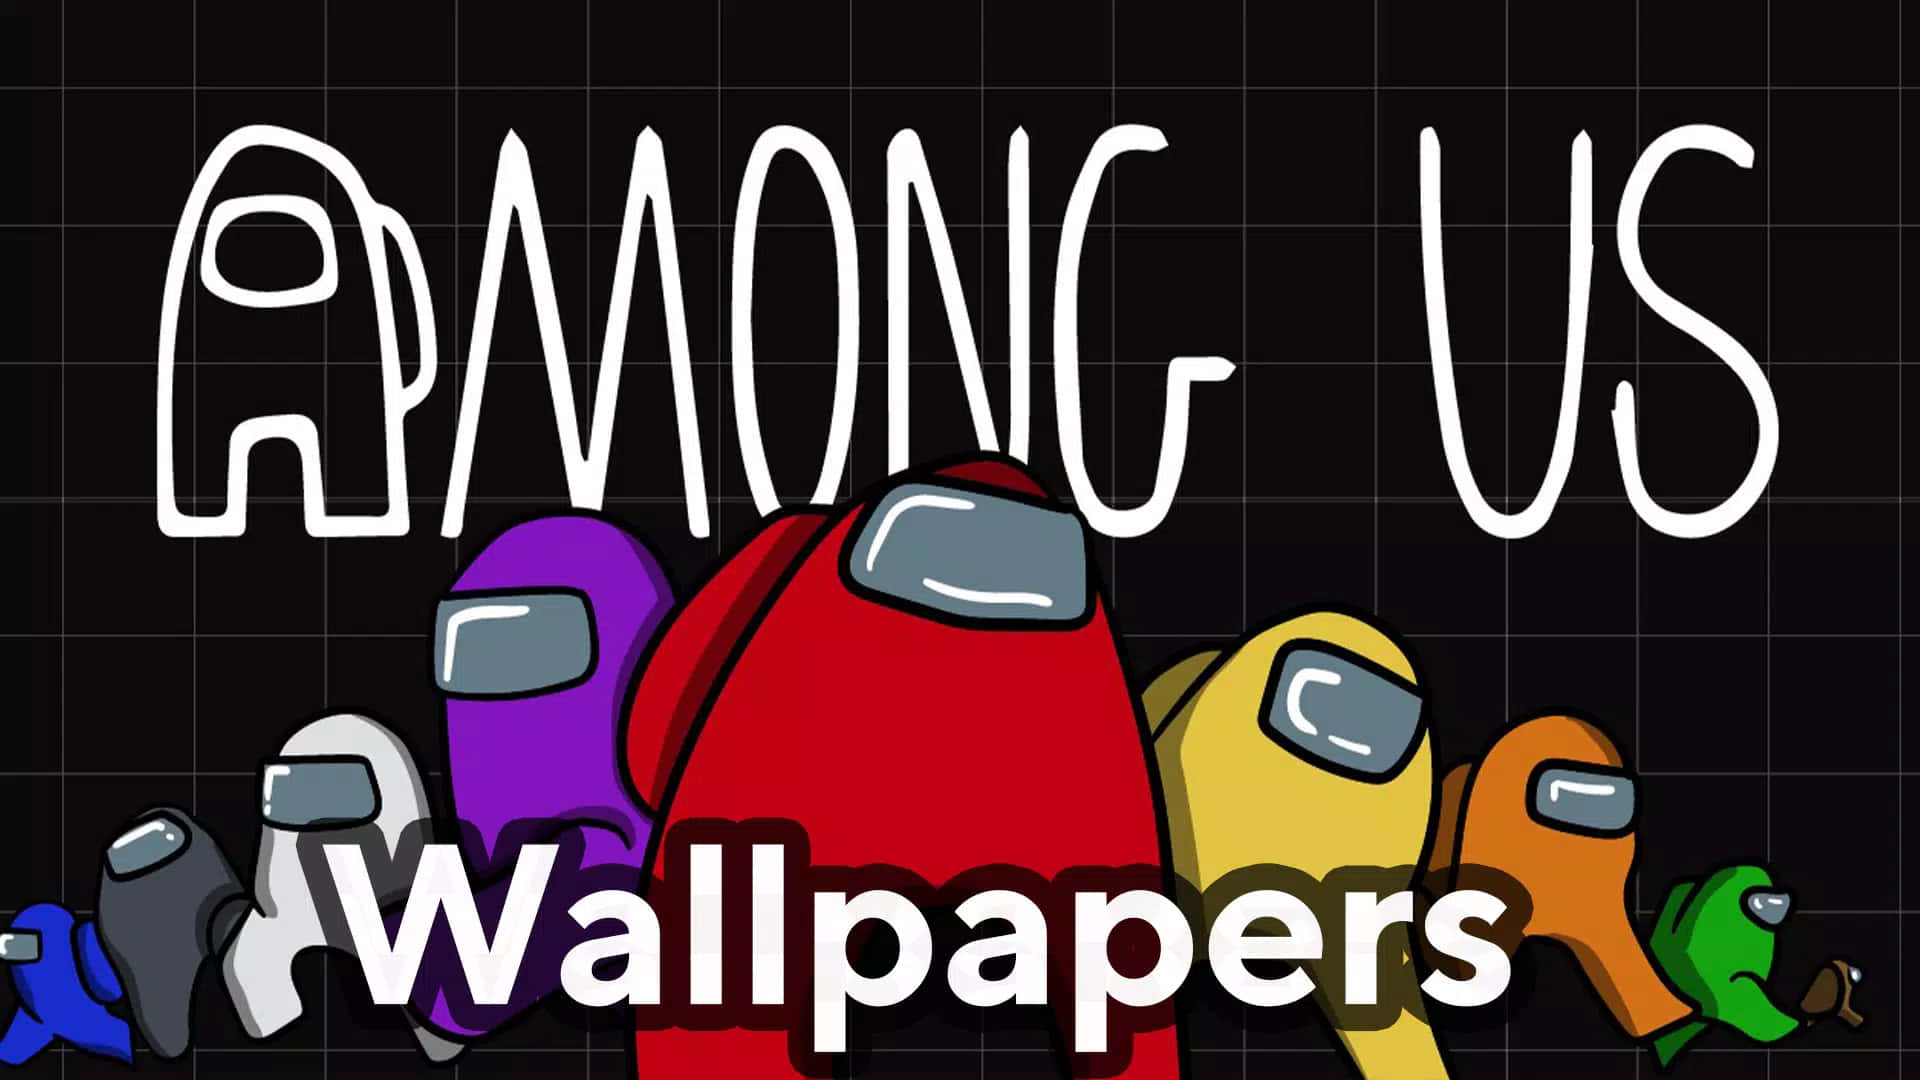 Imposter wallpaper hd offline for Android - Download